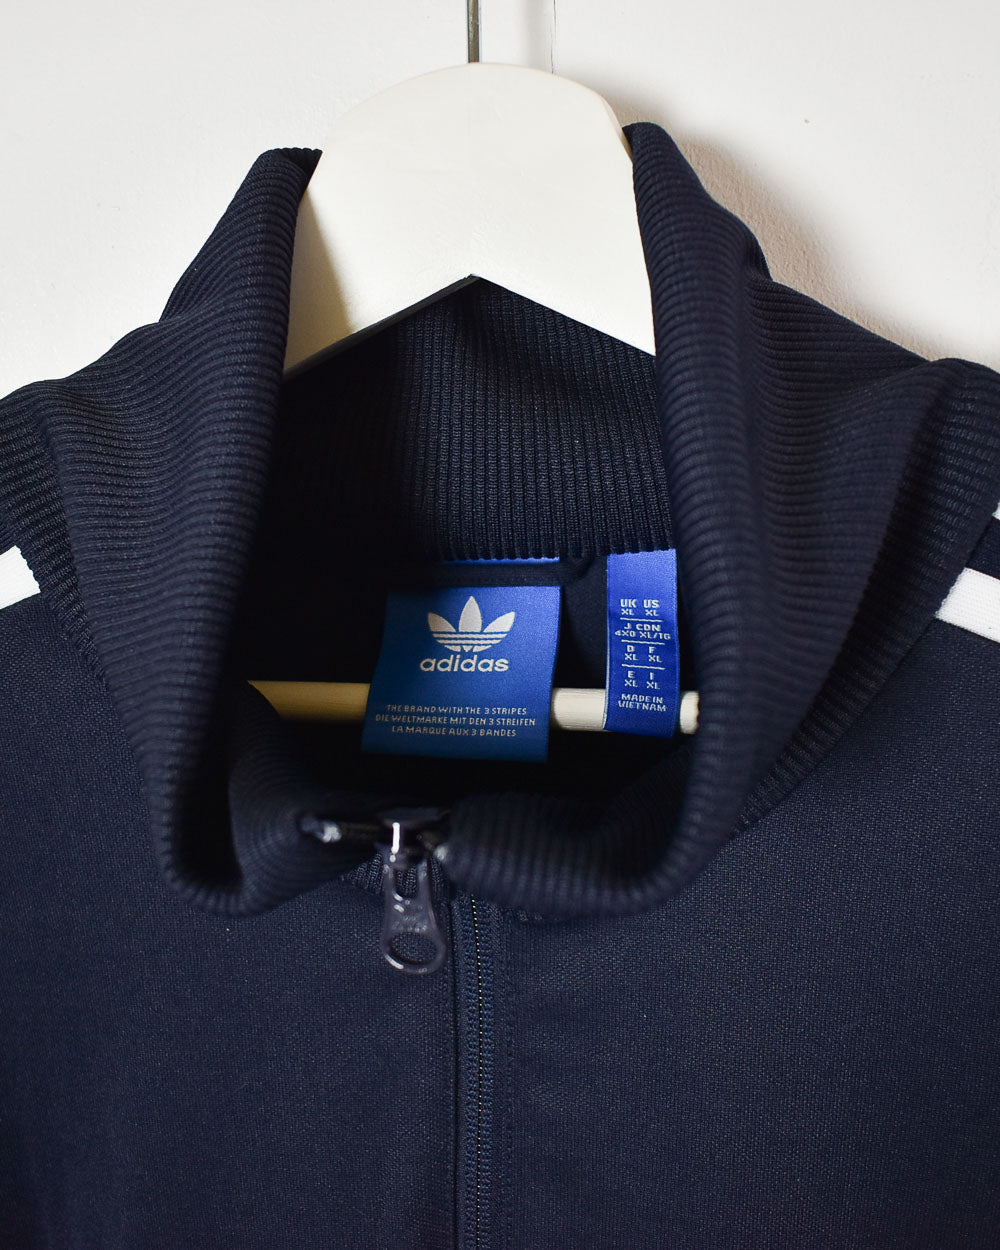 Navy Adidas 1/4 Zip Pullover Tracksuit Top - X-Large